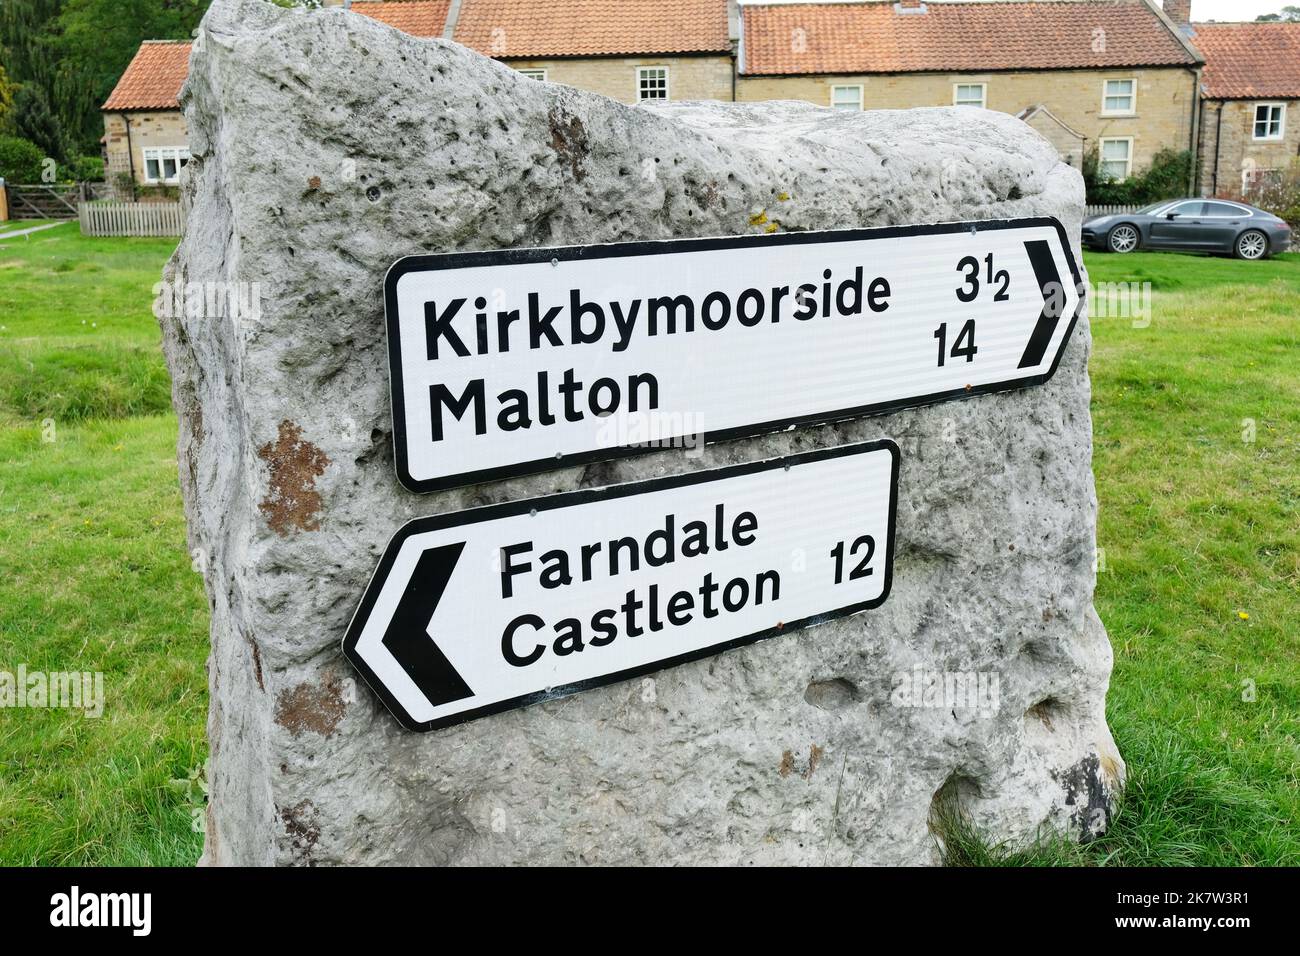 Directional road sign, Hutton le Hole, Yorkshire, UK - John Gollop Stock Photo